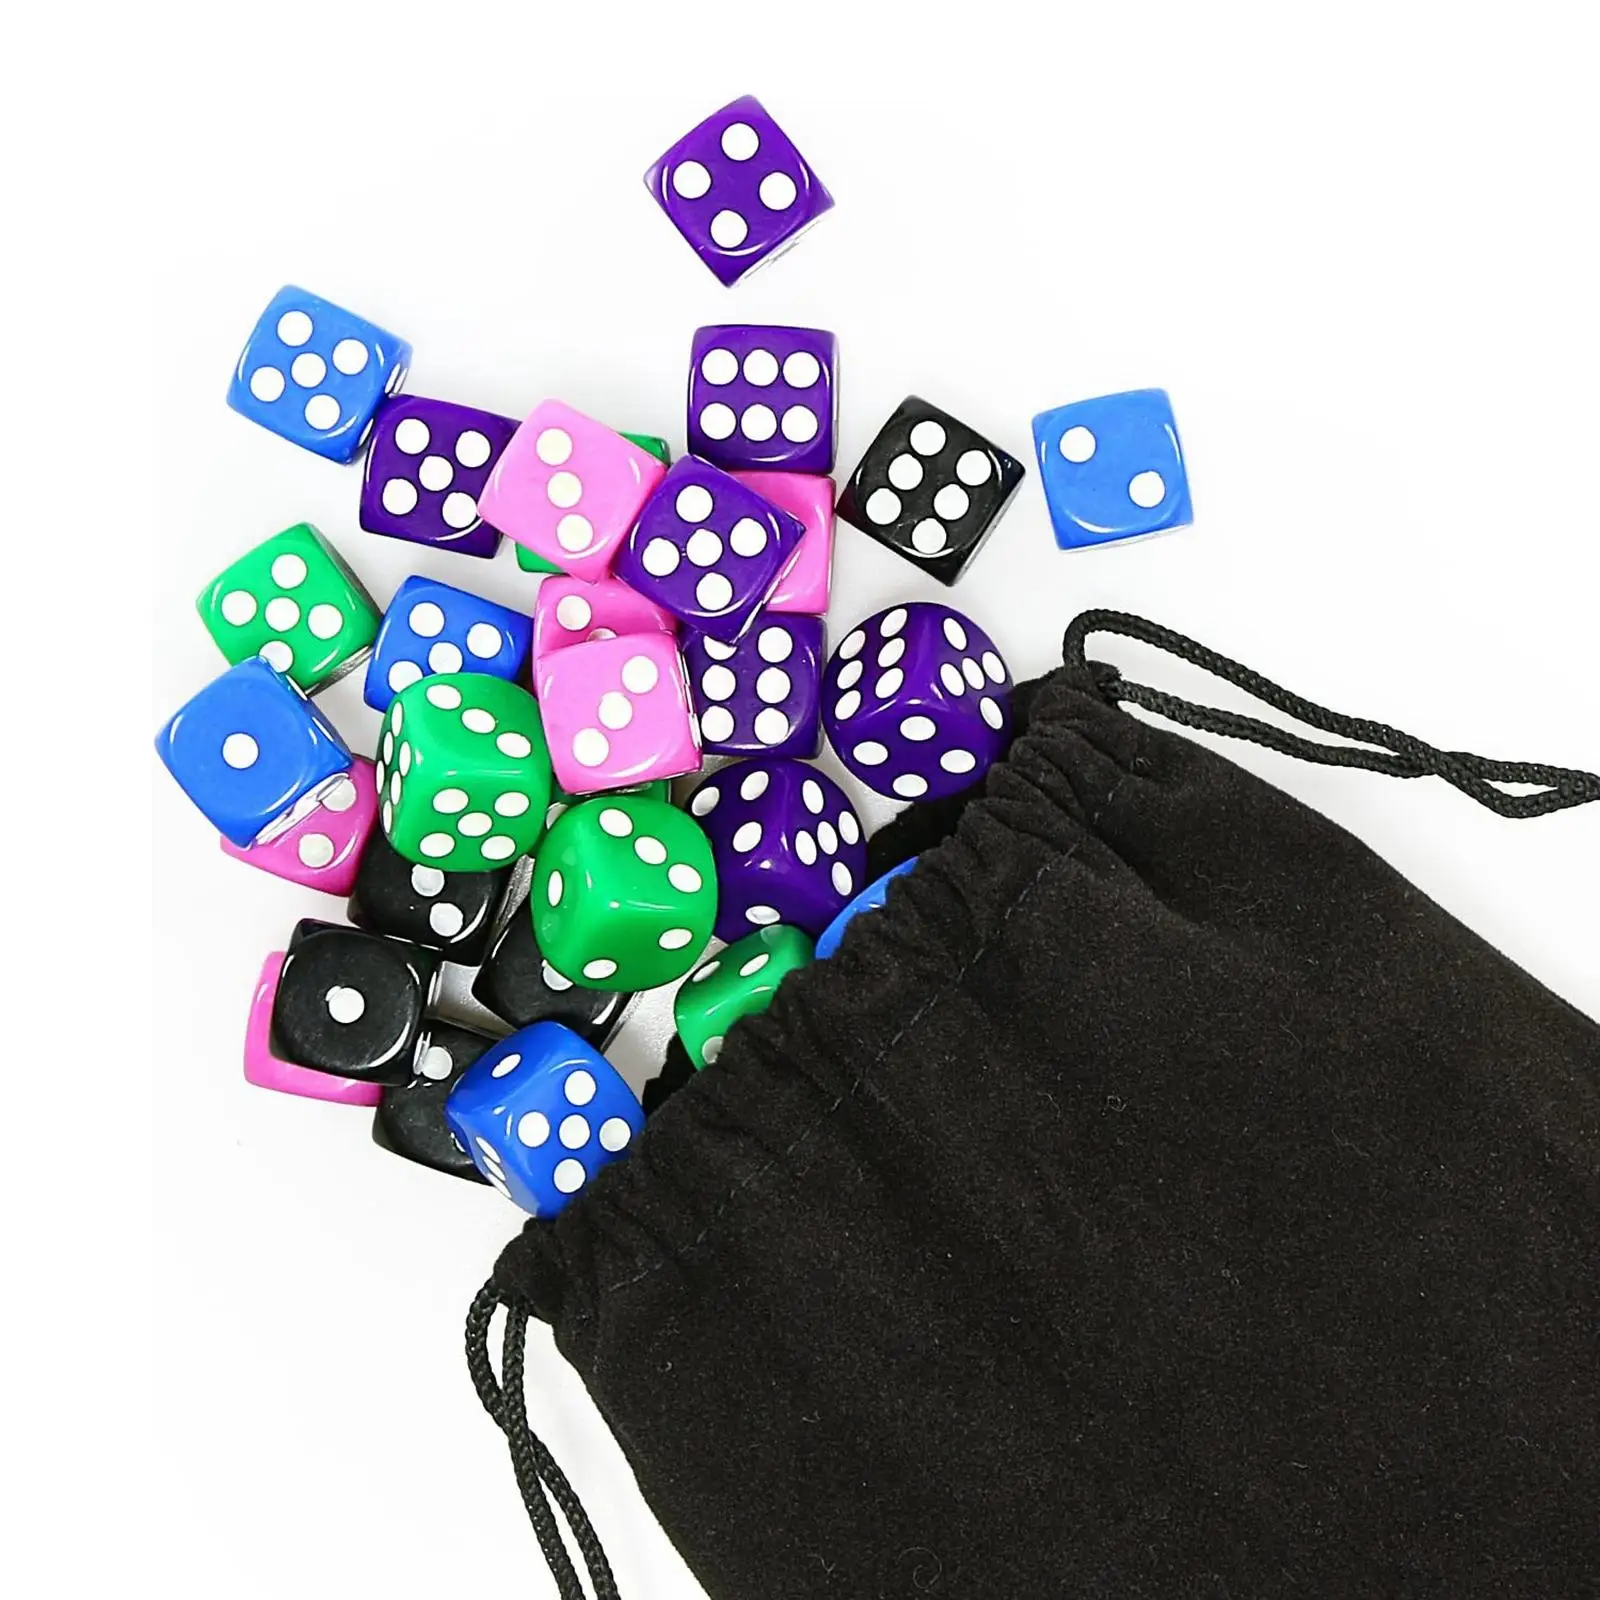 50 Pieces D6 6 Sided Dice Set with Velvet Pouch Party Toys for MTG 16mm Acrylic Dice Math Teaching Board Game Role Playing Games